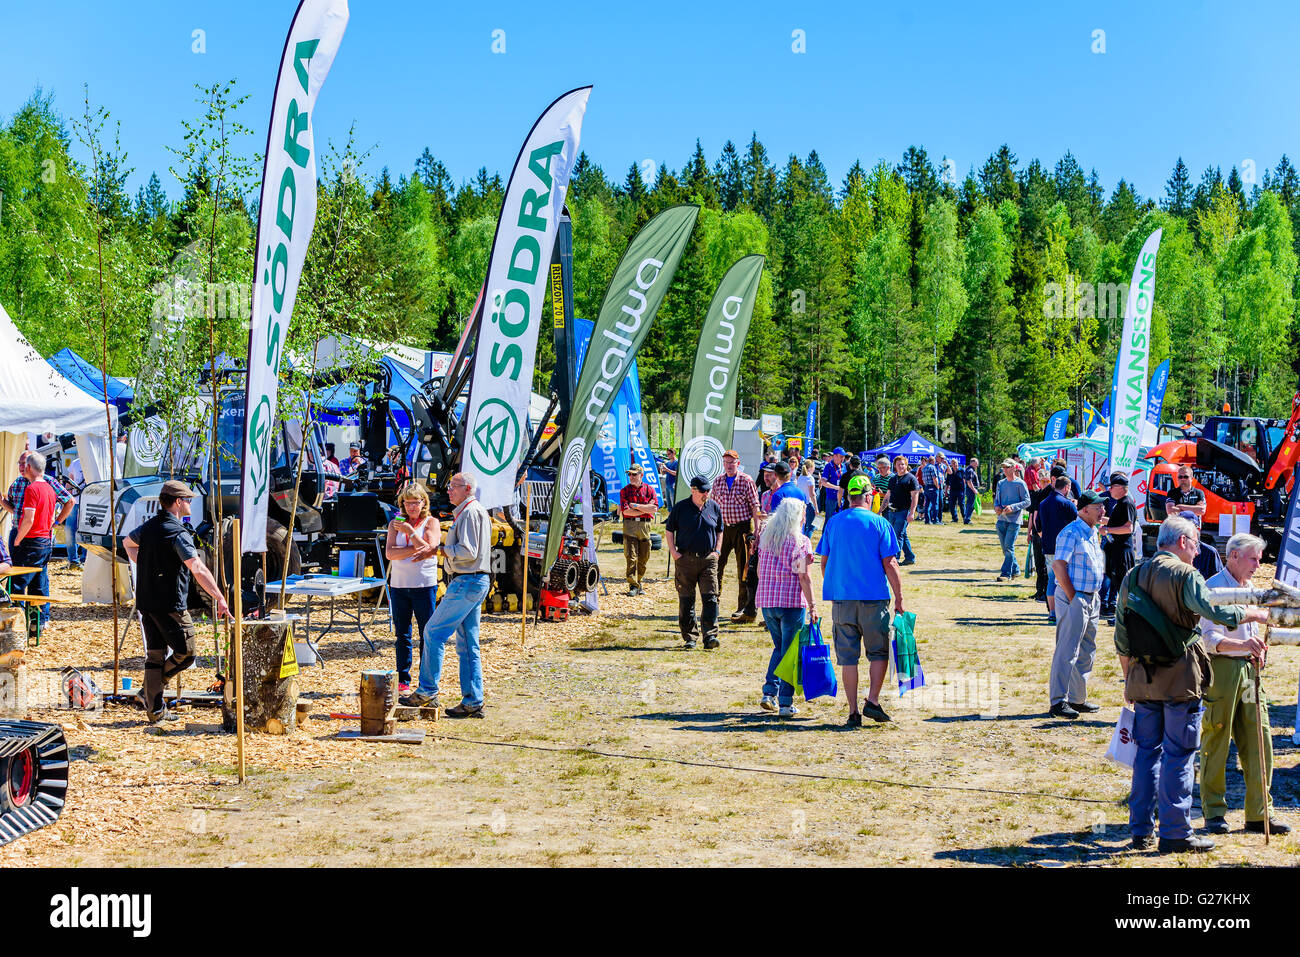 Emmaboda, Sweden - May 13, 2016: Forest and tractor (Skog och traktor) fair. Overview over part of the exhibition area with lots Stock Photo